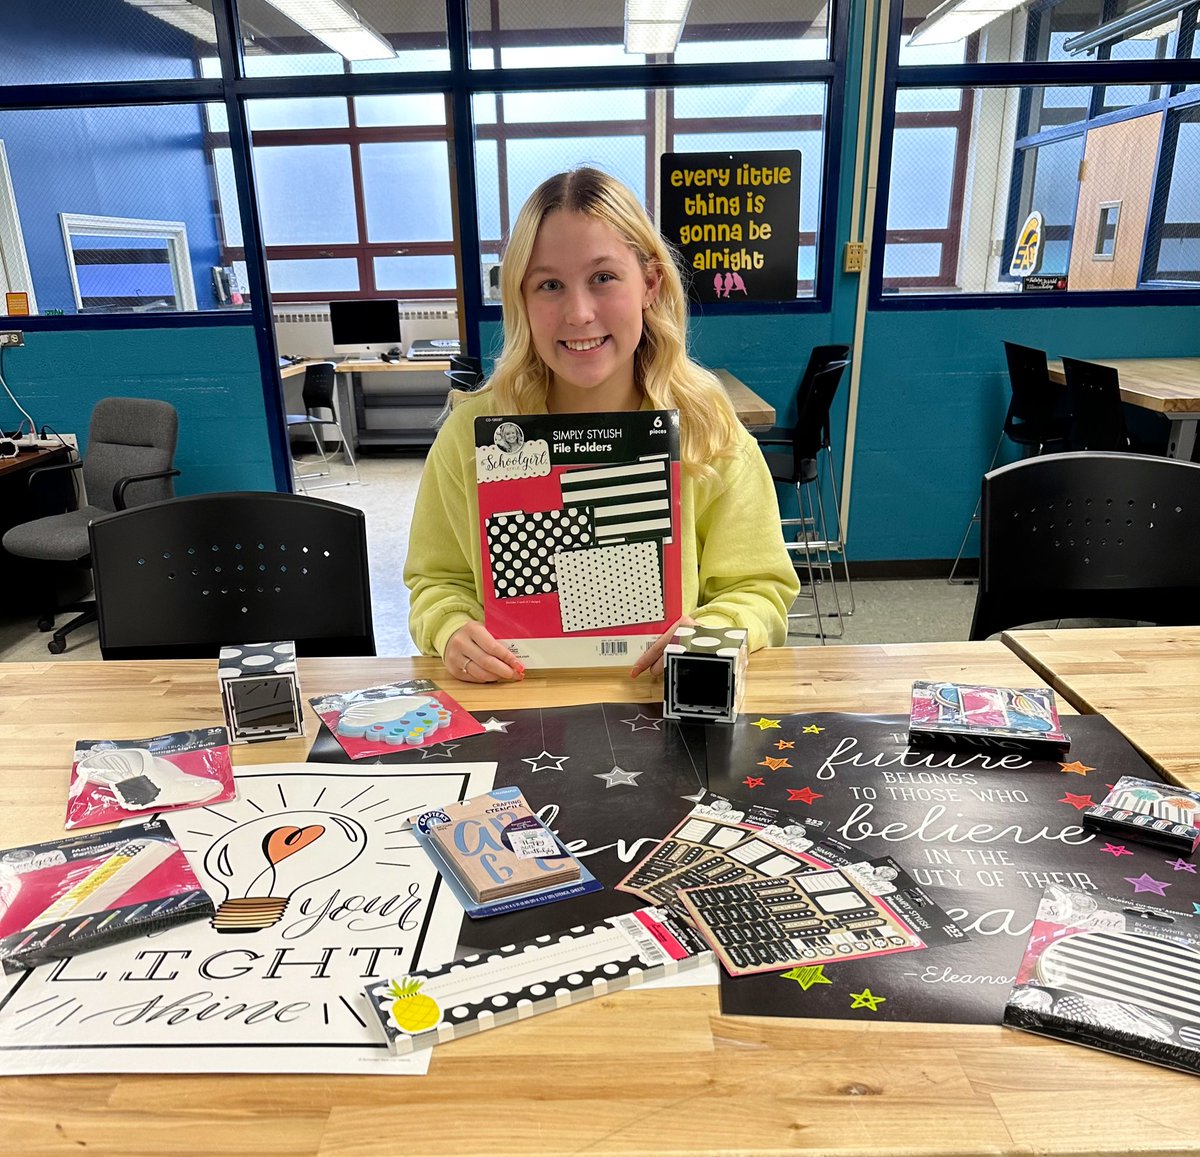 Gathering materials, resources, and knowledge today to craft a successful career tomorrow. Thanks to @EduPartnership Lile has the perfect starter kit to create an inviting classroom for her future elementary students! 📚💼 #CareerPrep #FutureReady #FutureTeacher